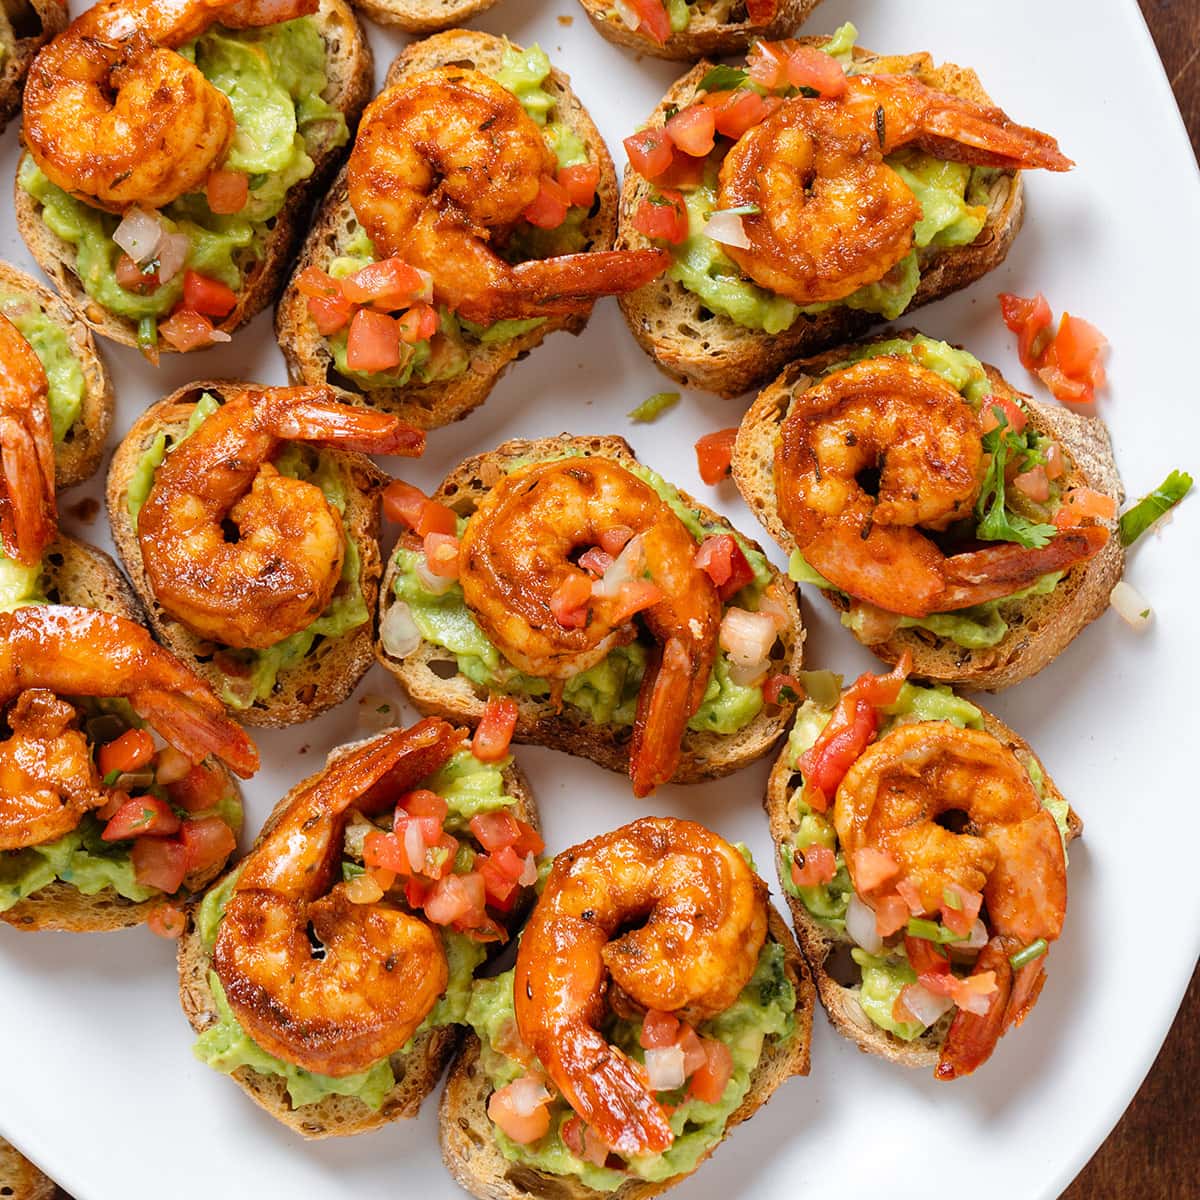 Toasted baguette slices topped with guacamole, pico de gallo, and shrimp.